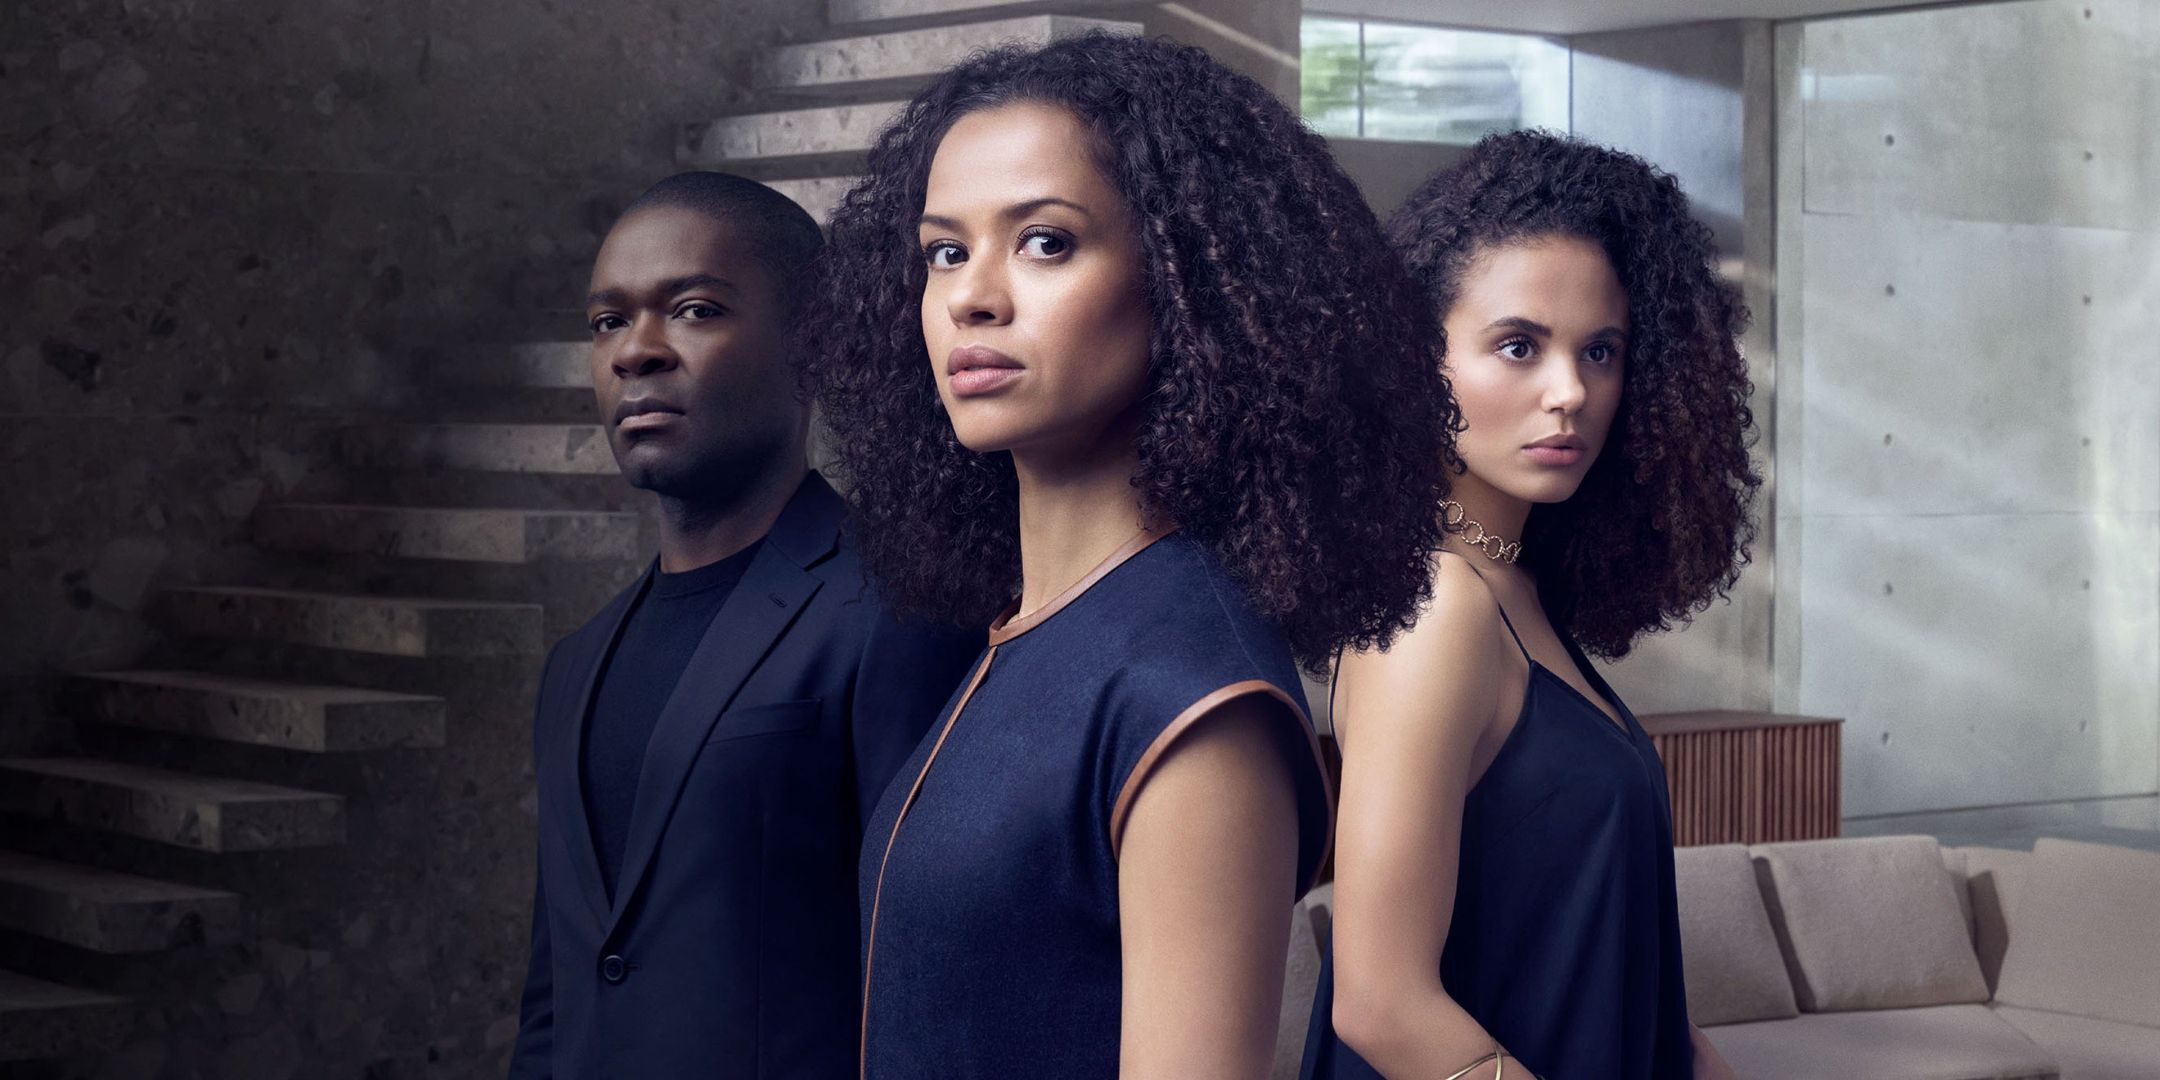 Gugu Mbatha Raw as Jane, Jessica Plummer as Emma and David Oyelowo as Edward in The Girl Before BCC series poster.